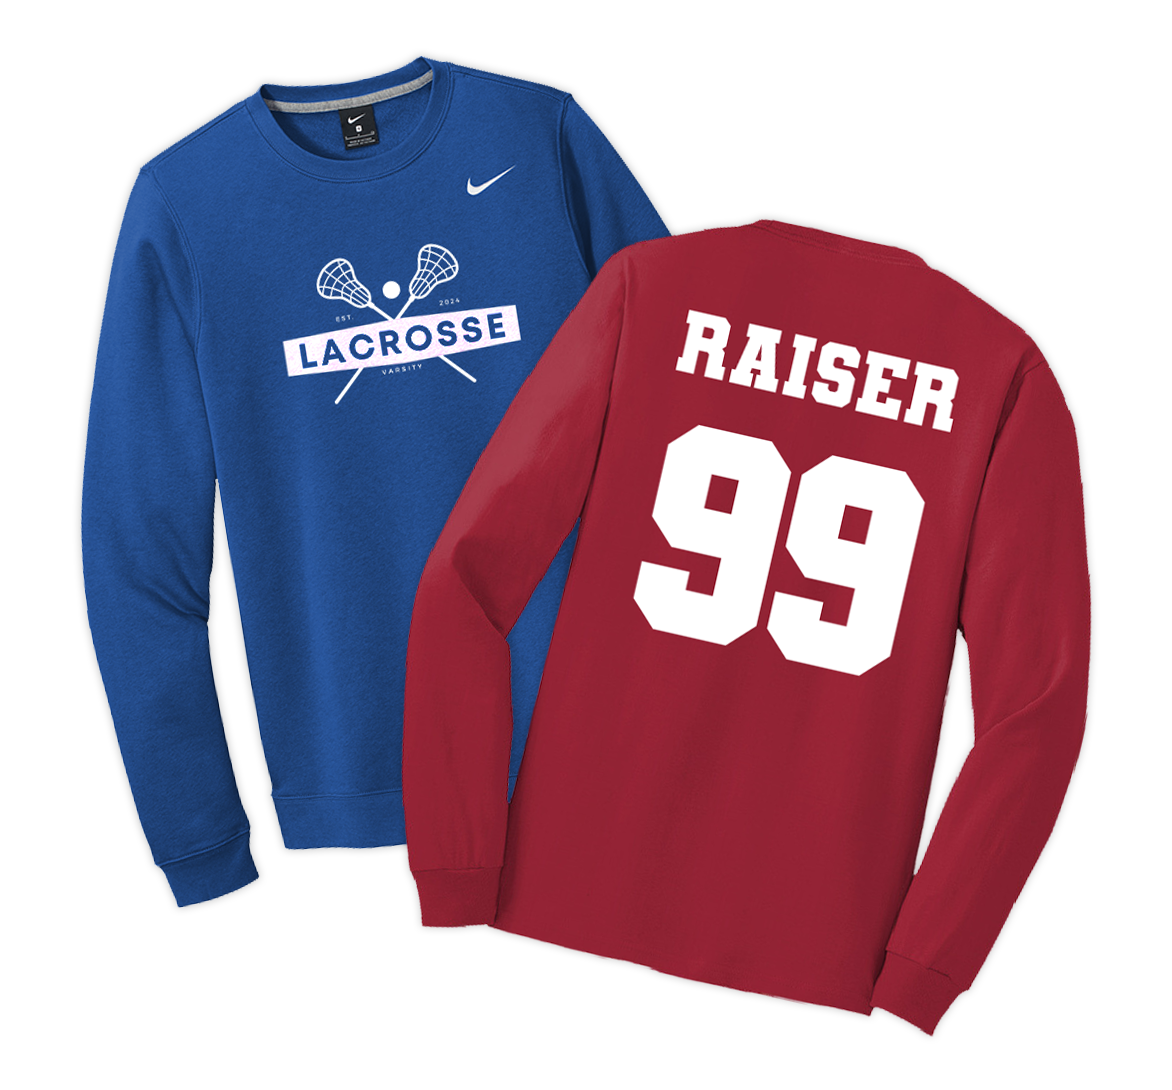 Snap! Store customized fan gear, two long sleeve t-shirts, one with custom printing on the back